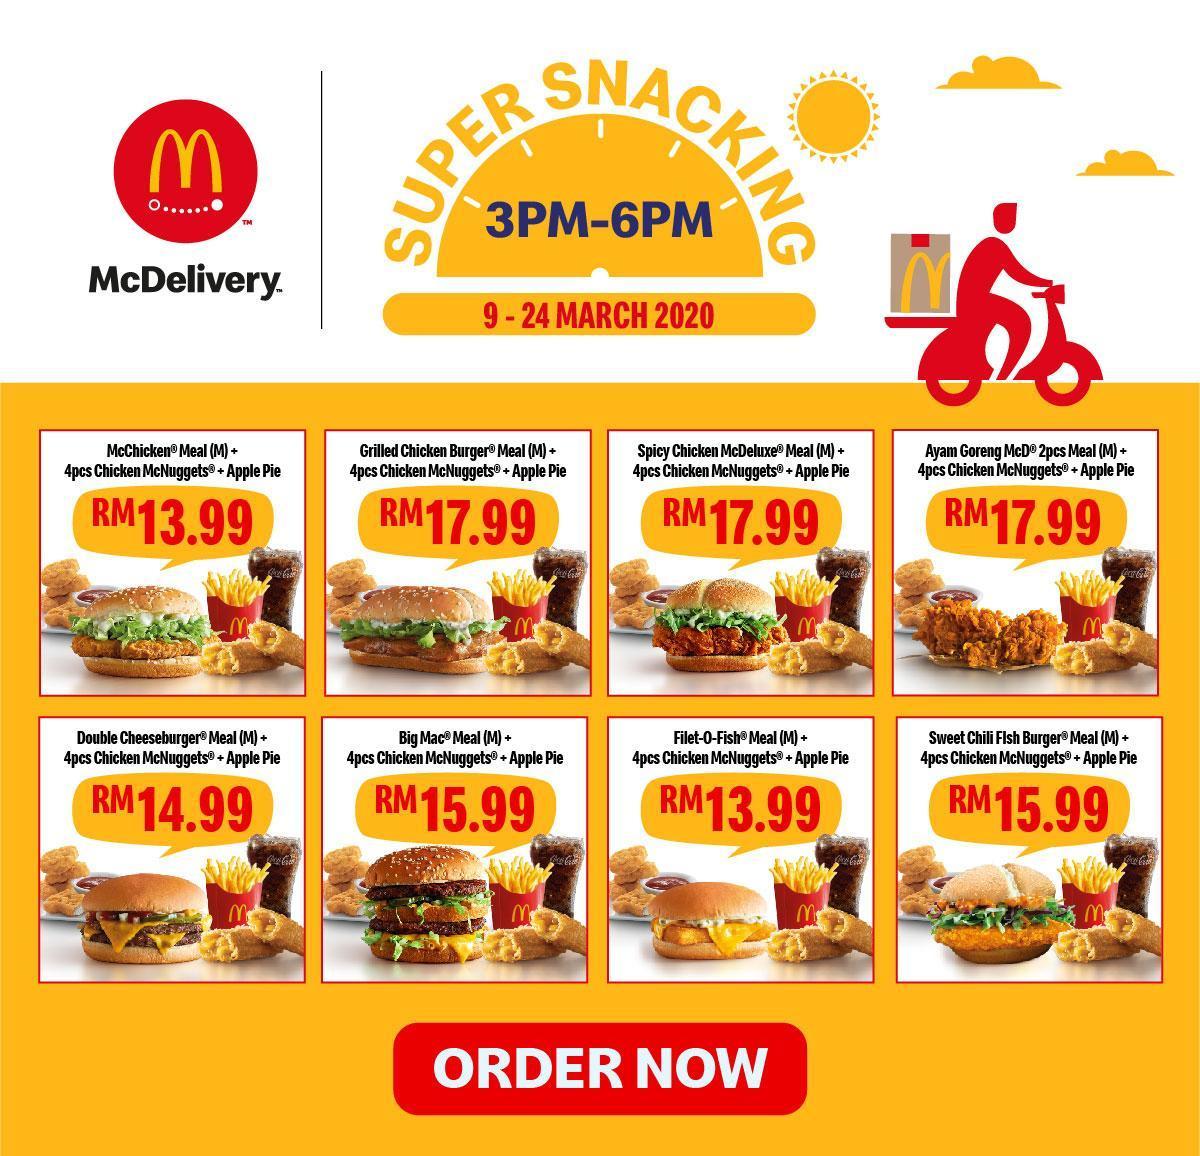 McDonald's Latest Promos Allow You To Save Up To 50%